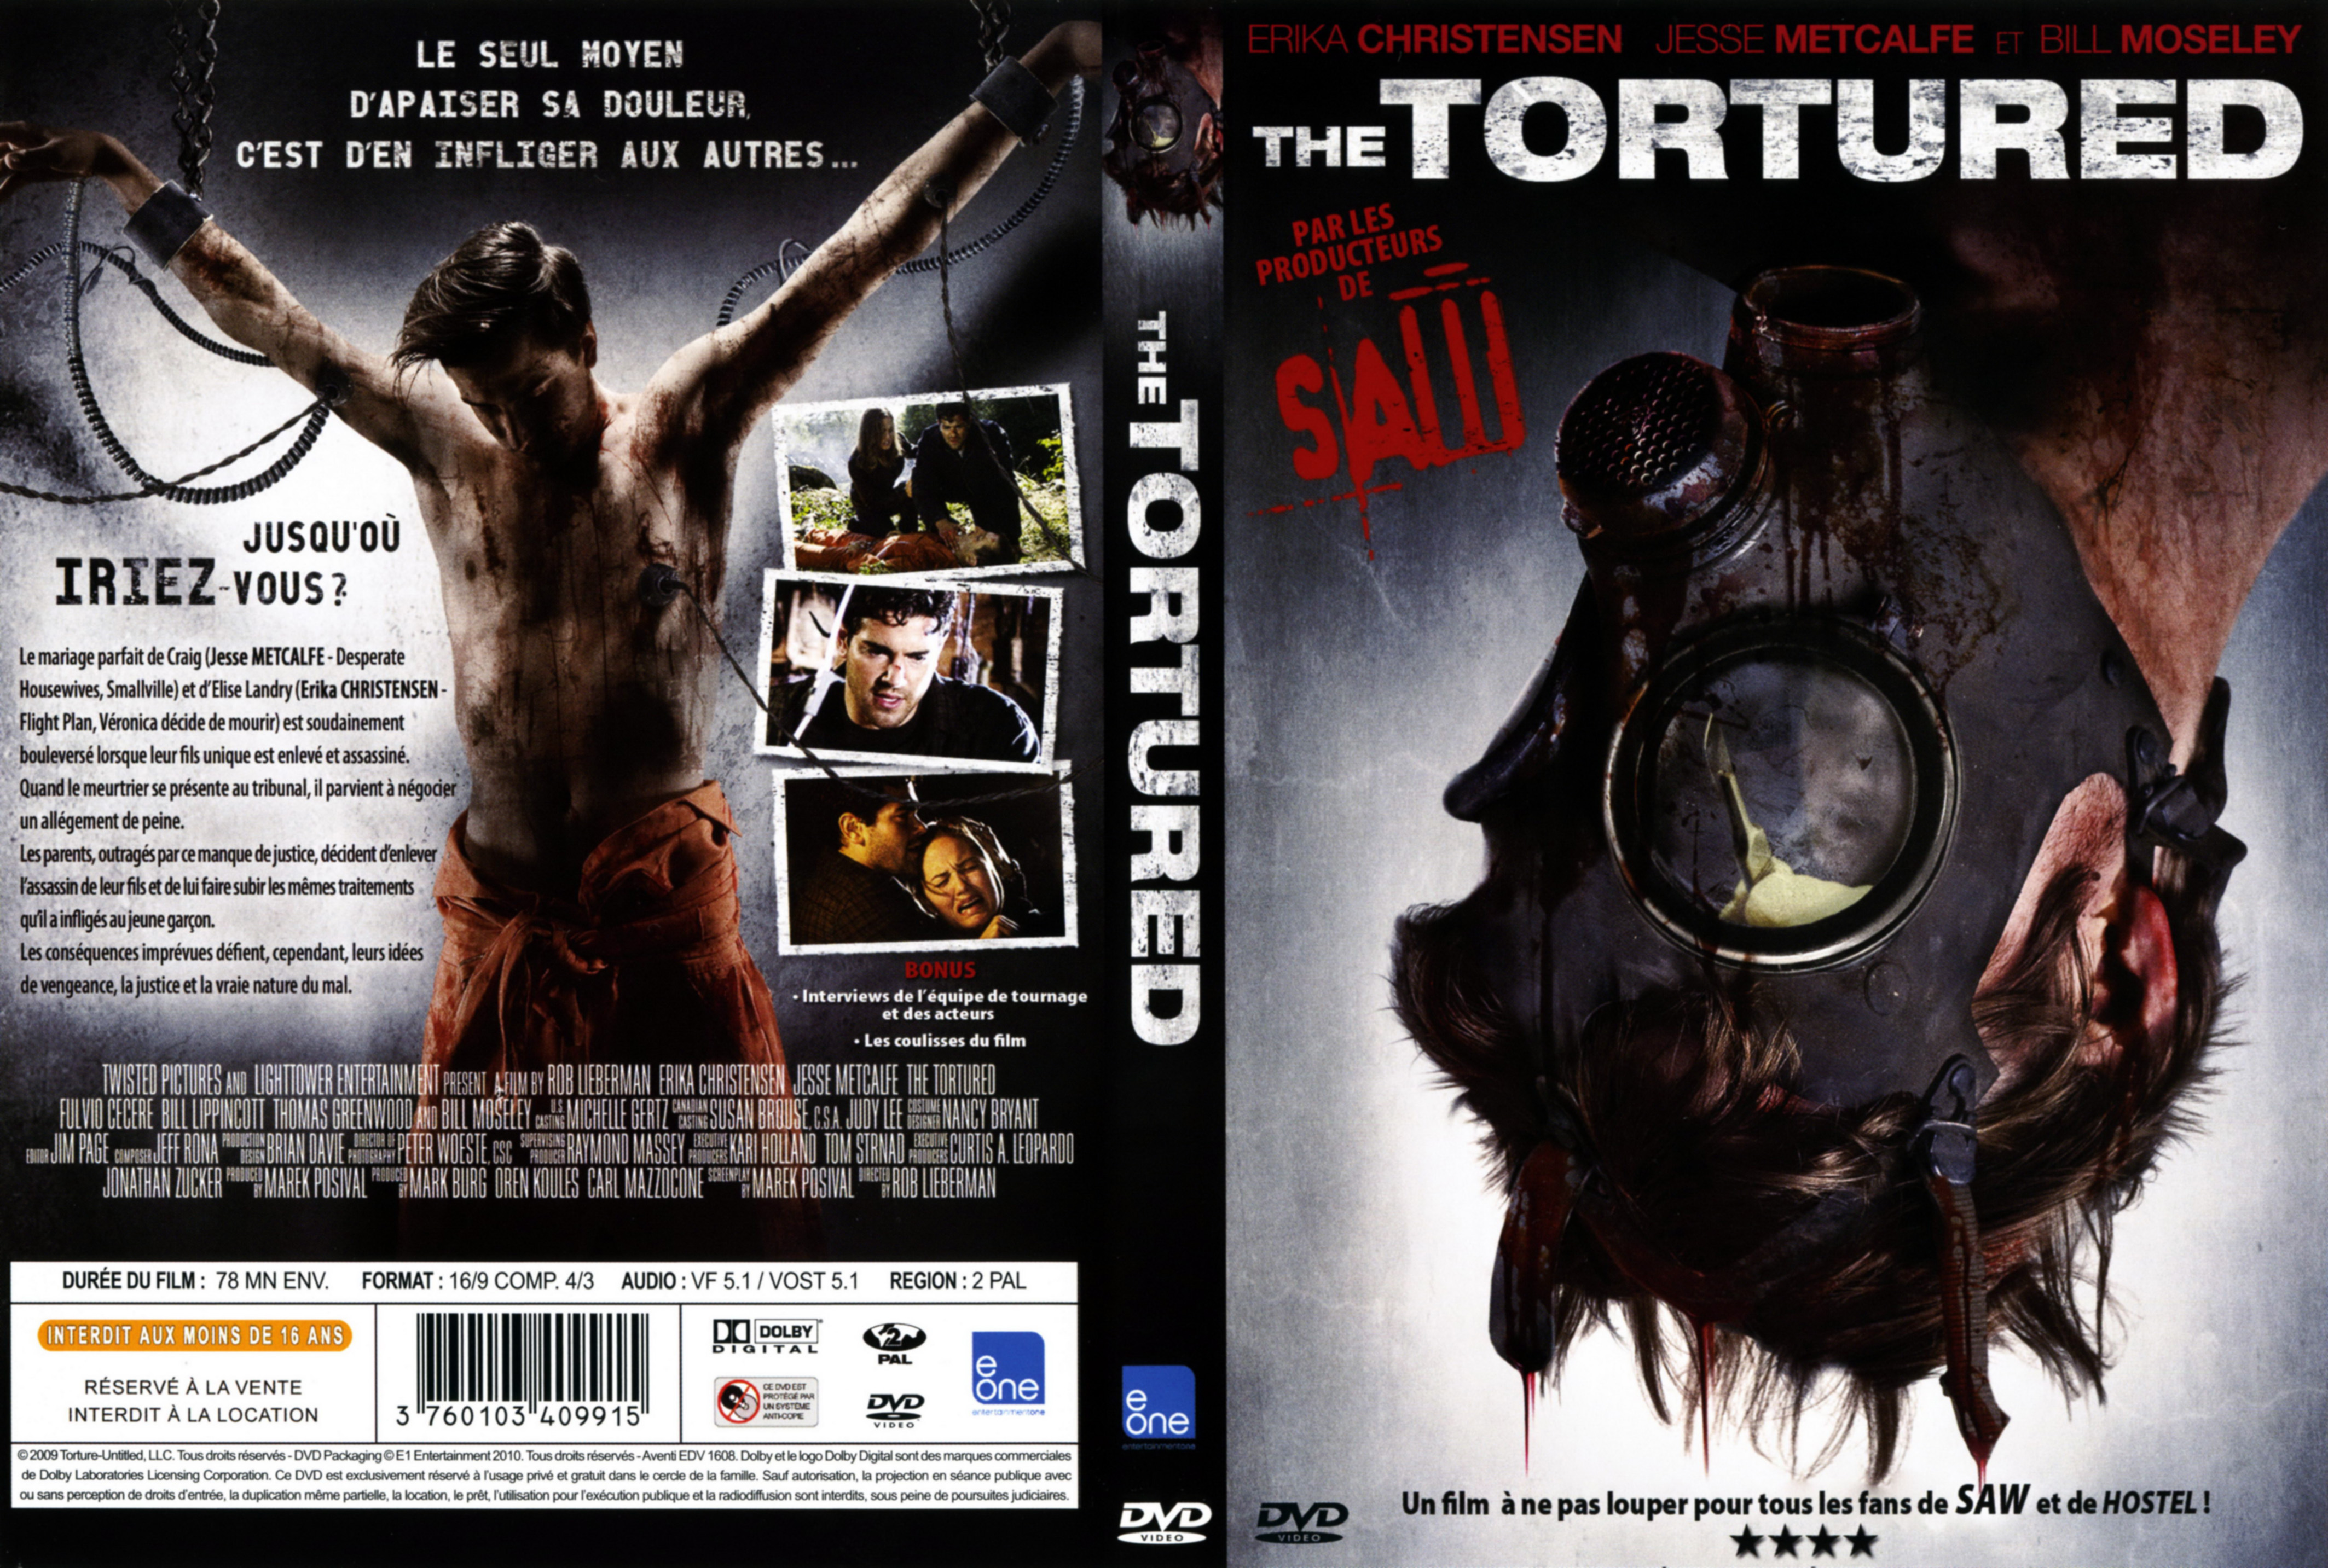 Jaquette DVD The tortured